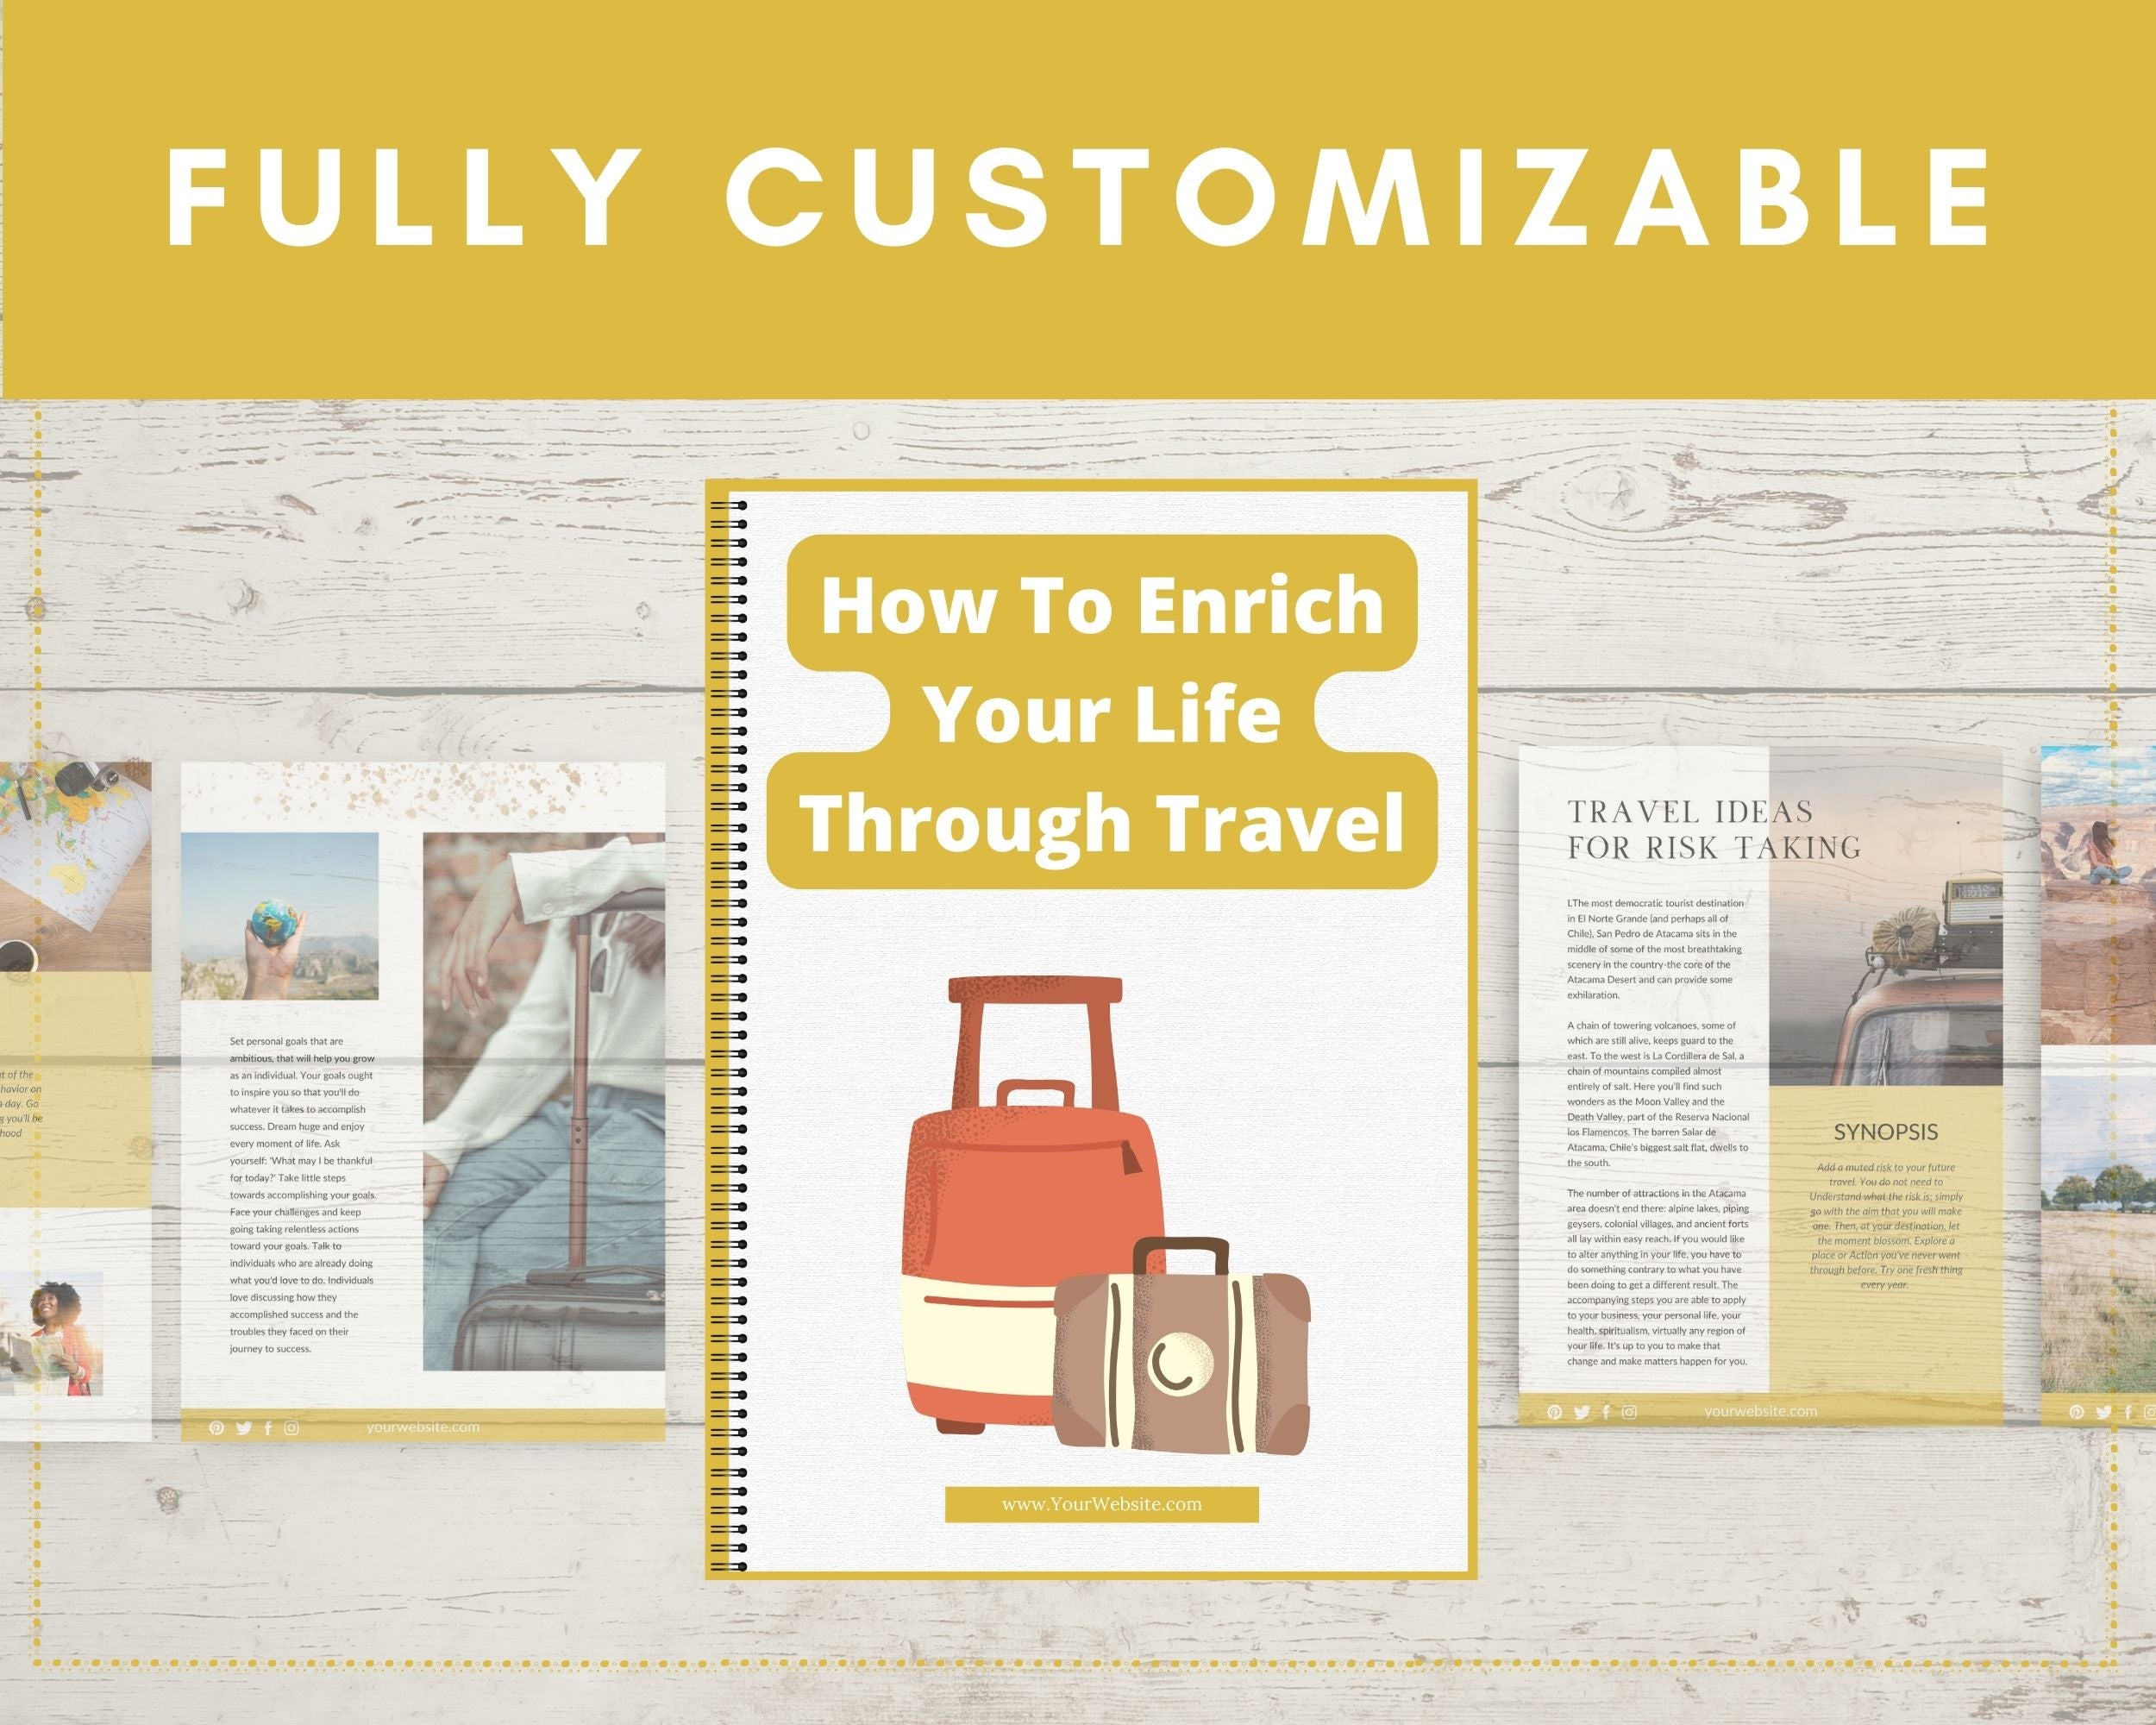 Editable How To Enrich Your Life Through Travel Ebook in Canva | Rebrandable and Resizable Canva Template